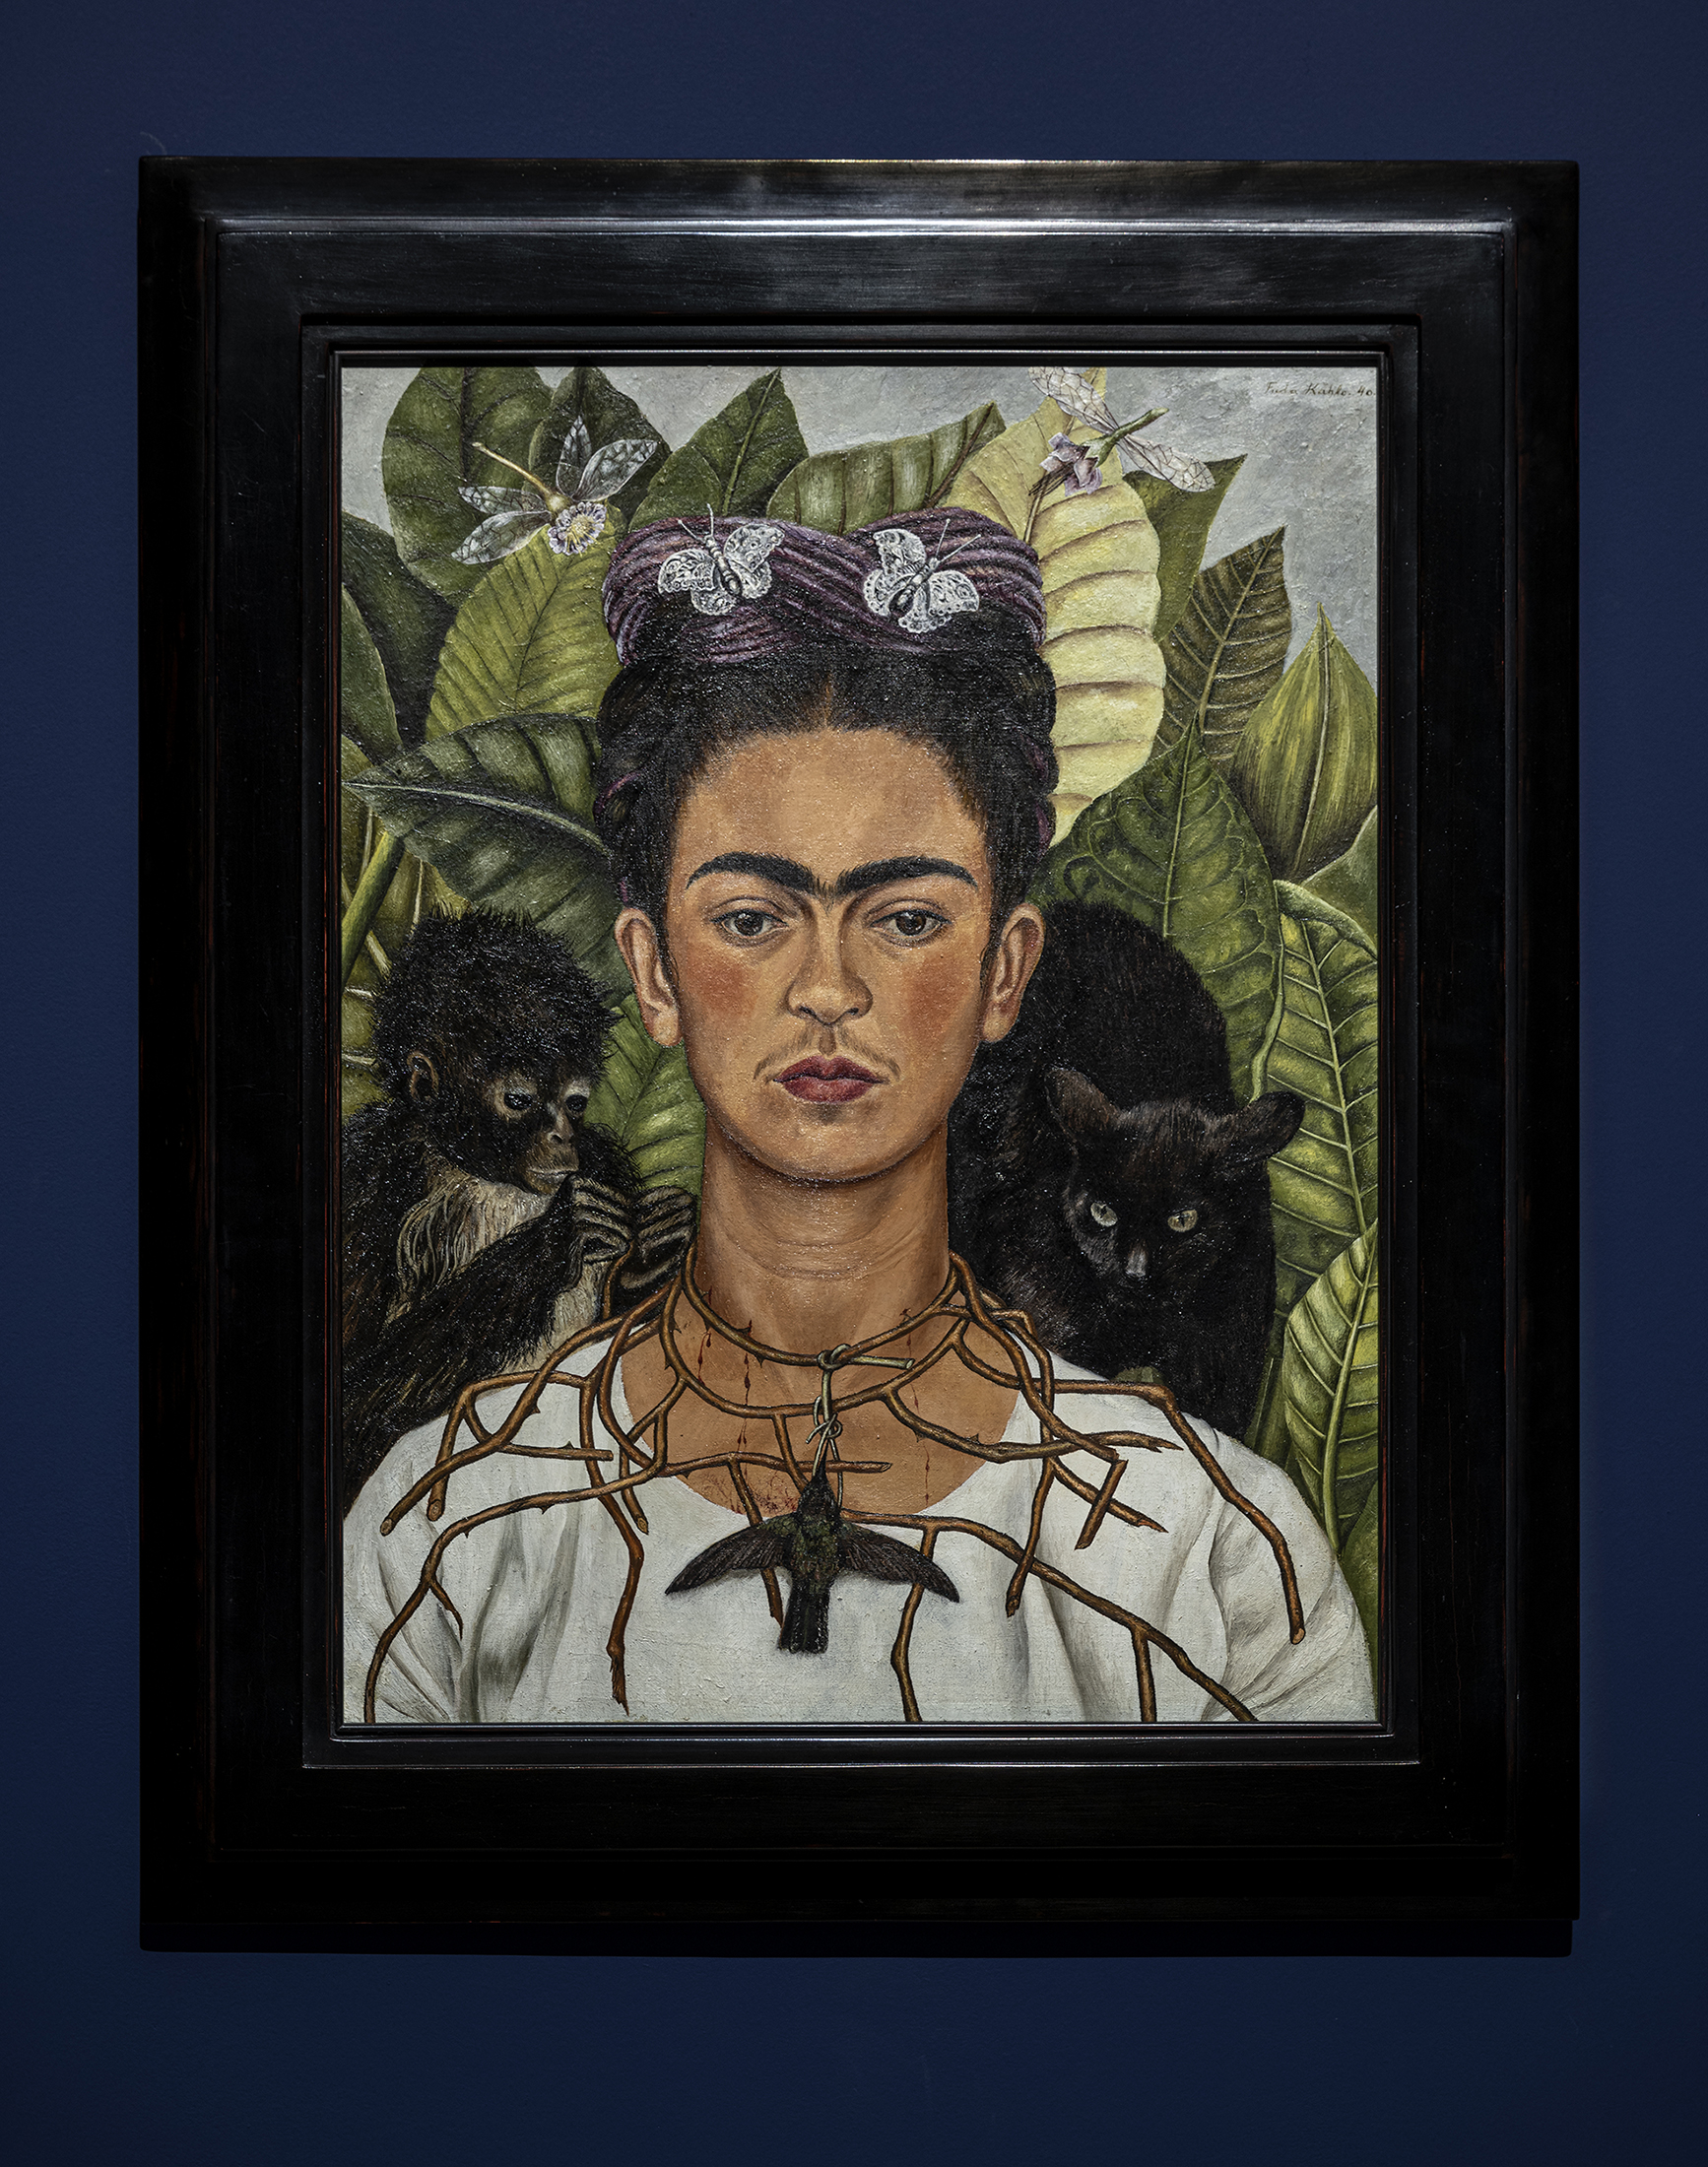 Installation view of Frida Kahlo, Self Portrait with Hummingbird and Thorn Necklace (1940). Collection Harry Ransom Center, The University of Texas at Austin, Nickolas Muray Collection of Modern Mexican Art. © Banco de México Diego Rivera & Frida Kahlo Museums Trust. Photo Graham De Lacy